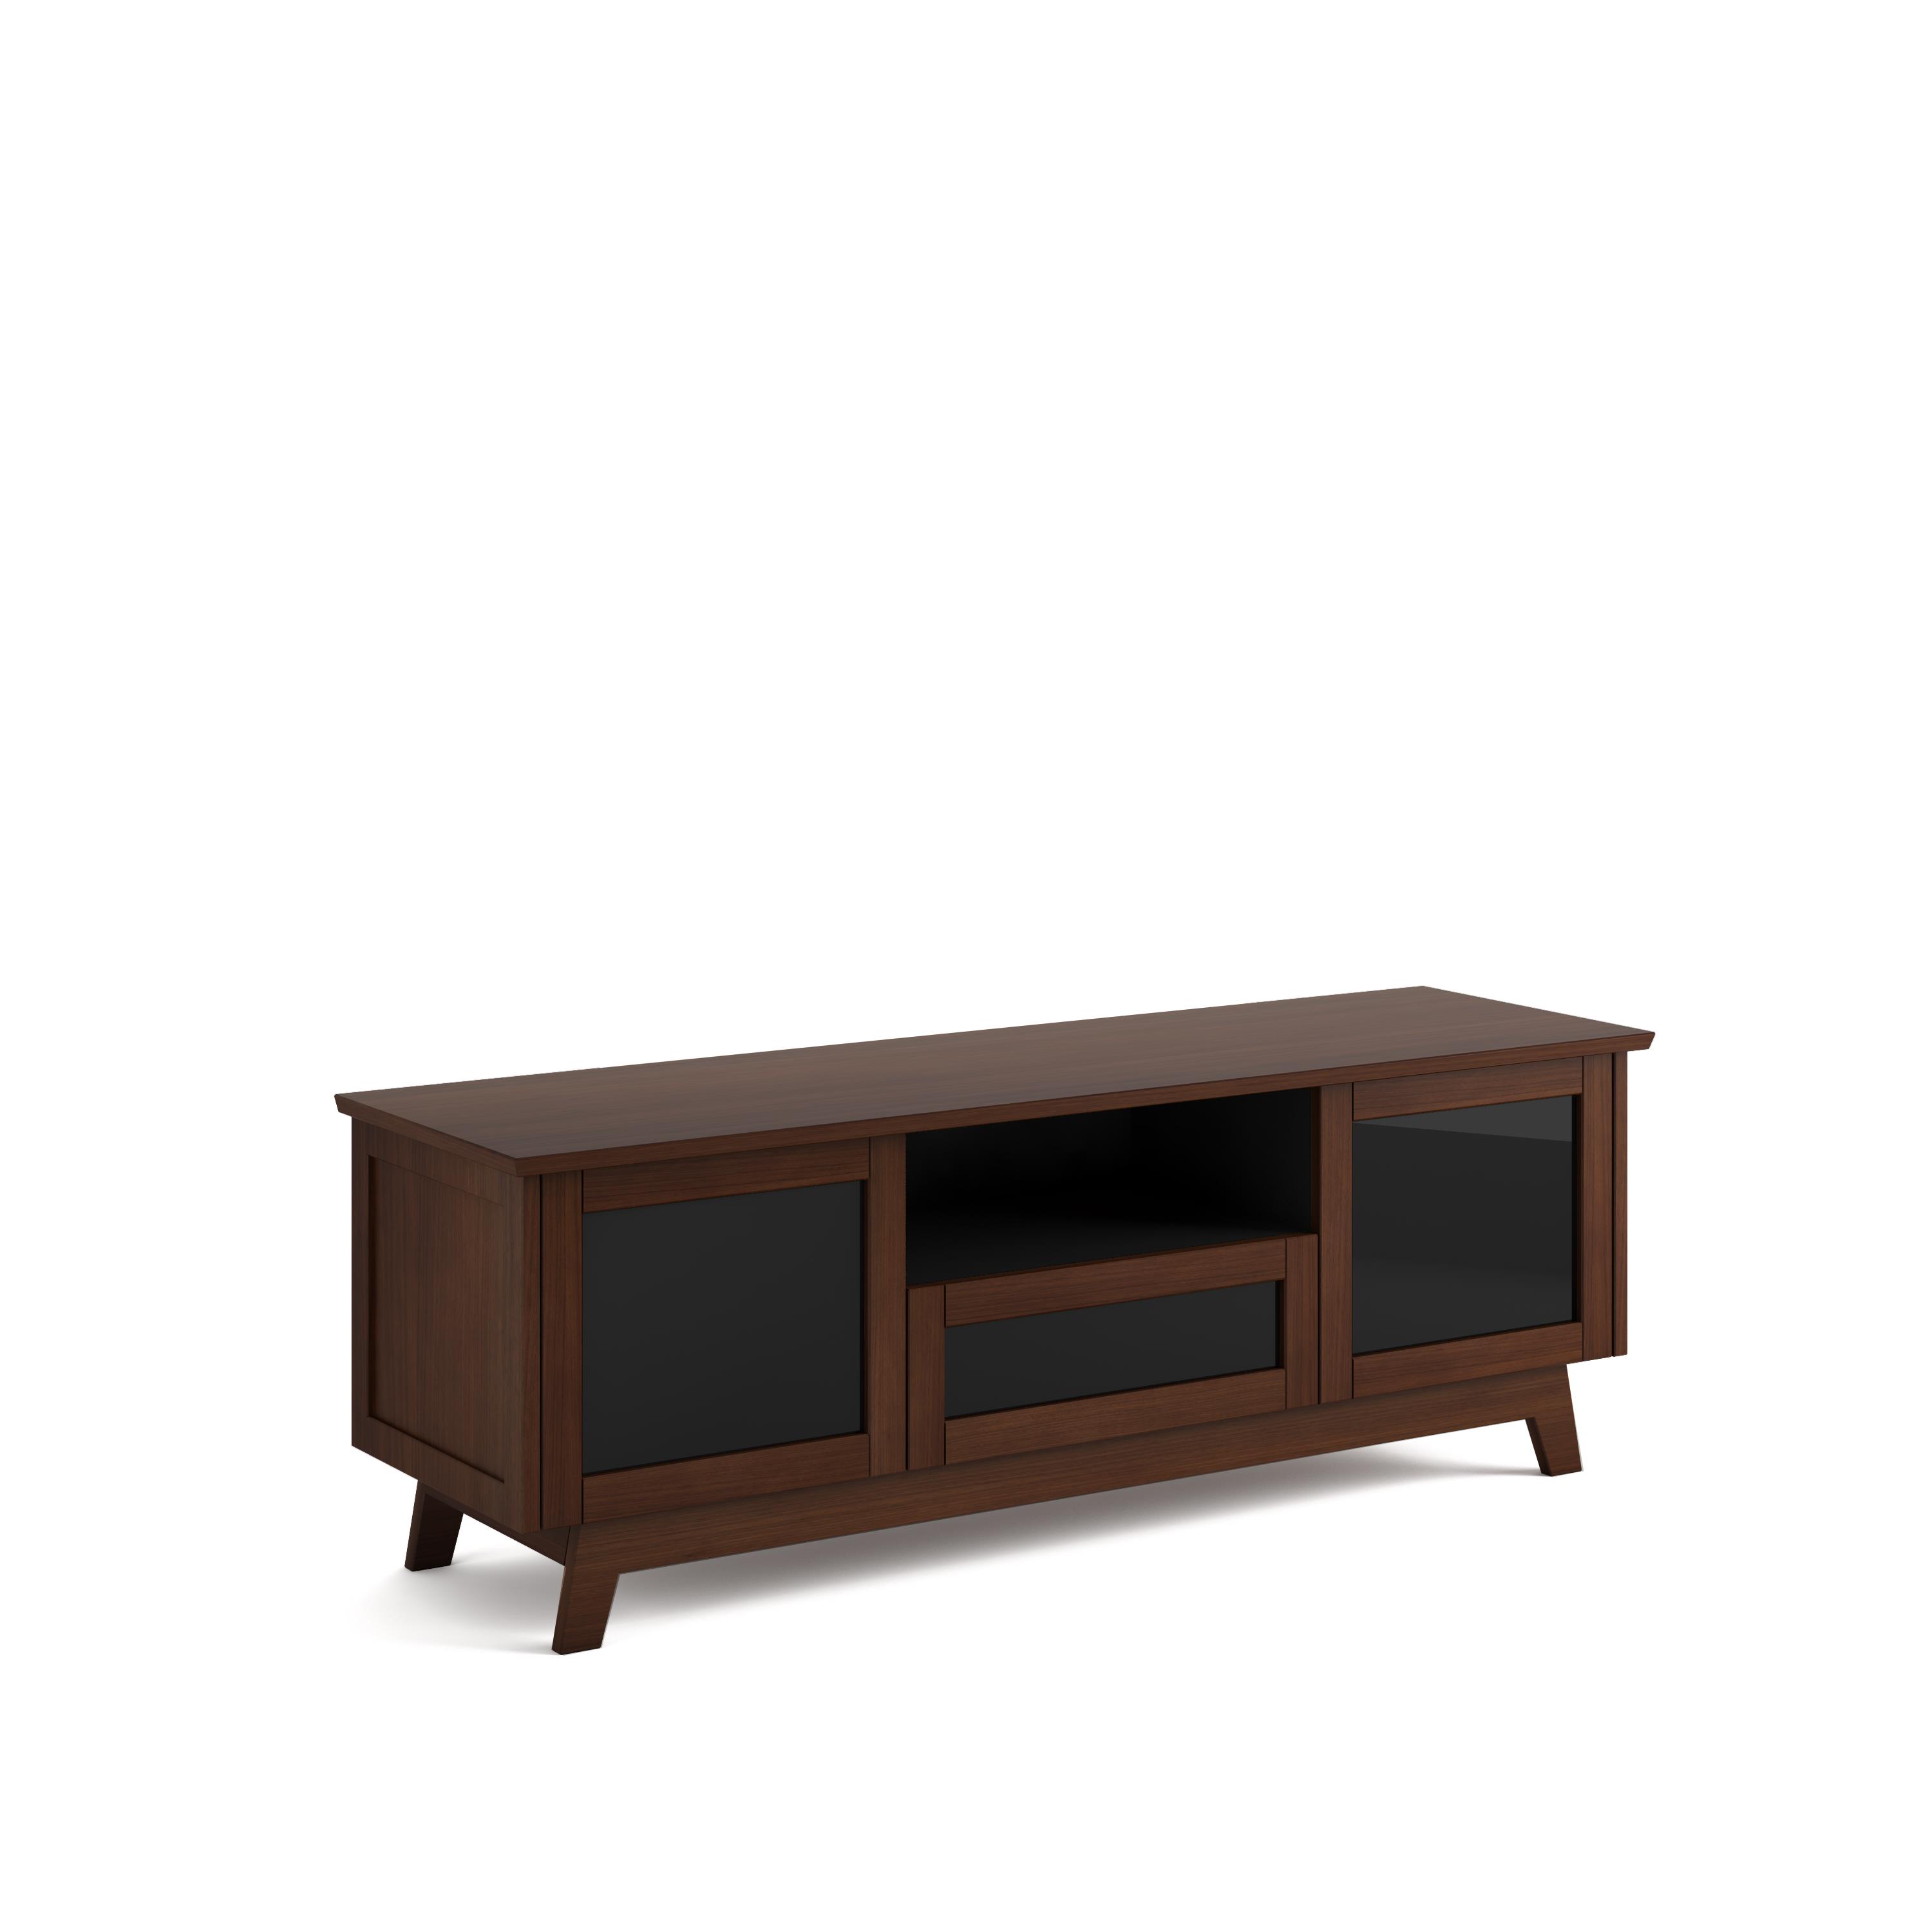 Salamander Designs Transitional Audio/video cabinet for TVs up to 80